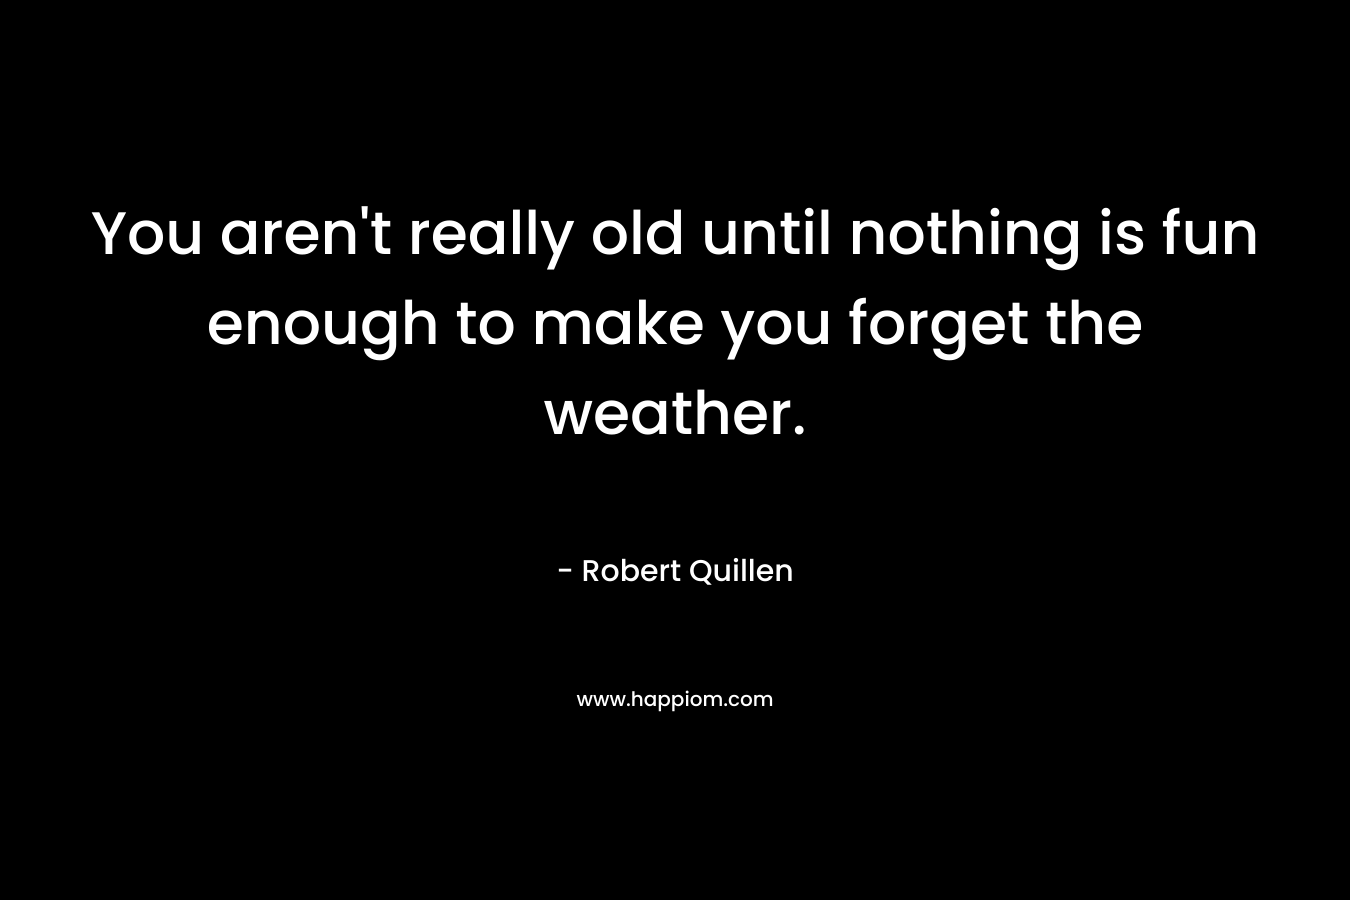 You aren’t really old until nothing is fun enough to make you forget the weather. – Robert Quillen